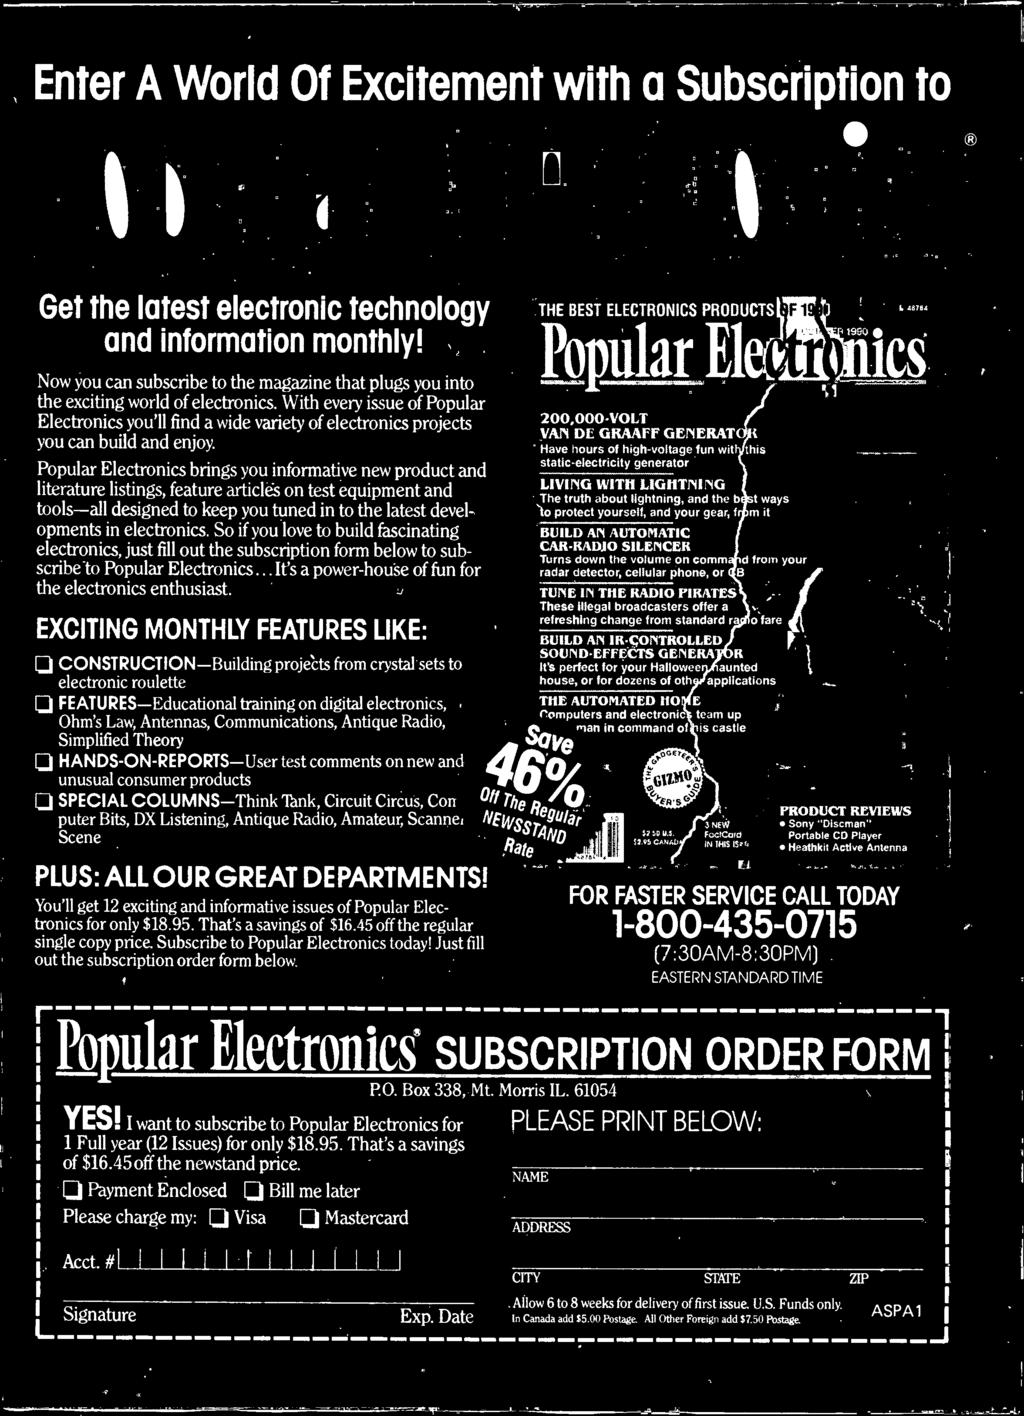 electronics. So if you love to build fascinating electronics, just fill out the subscription form below to subscribe to Popular Electronics... It's a power -house of fun for the electronics enthusiast.